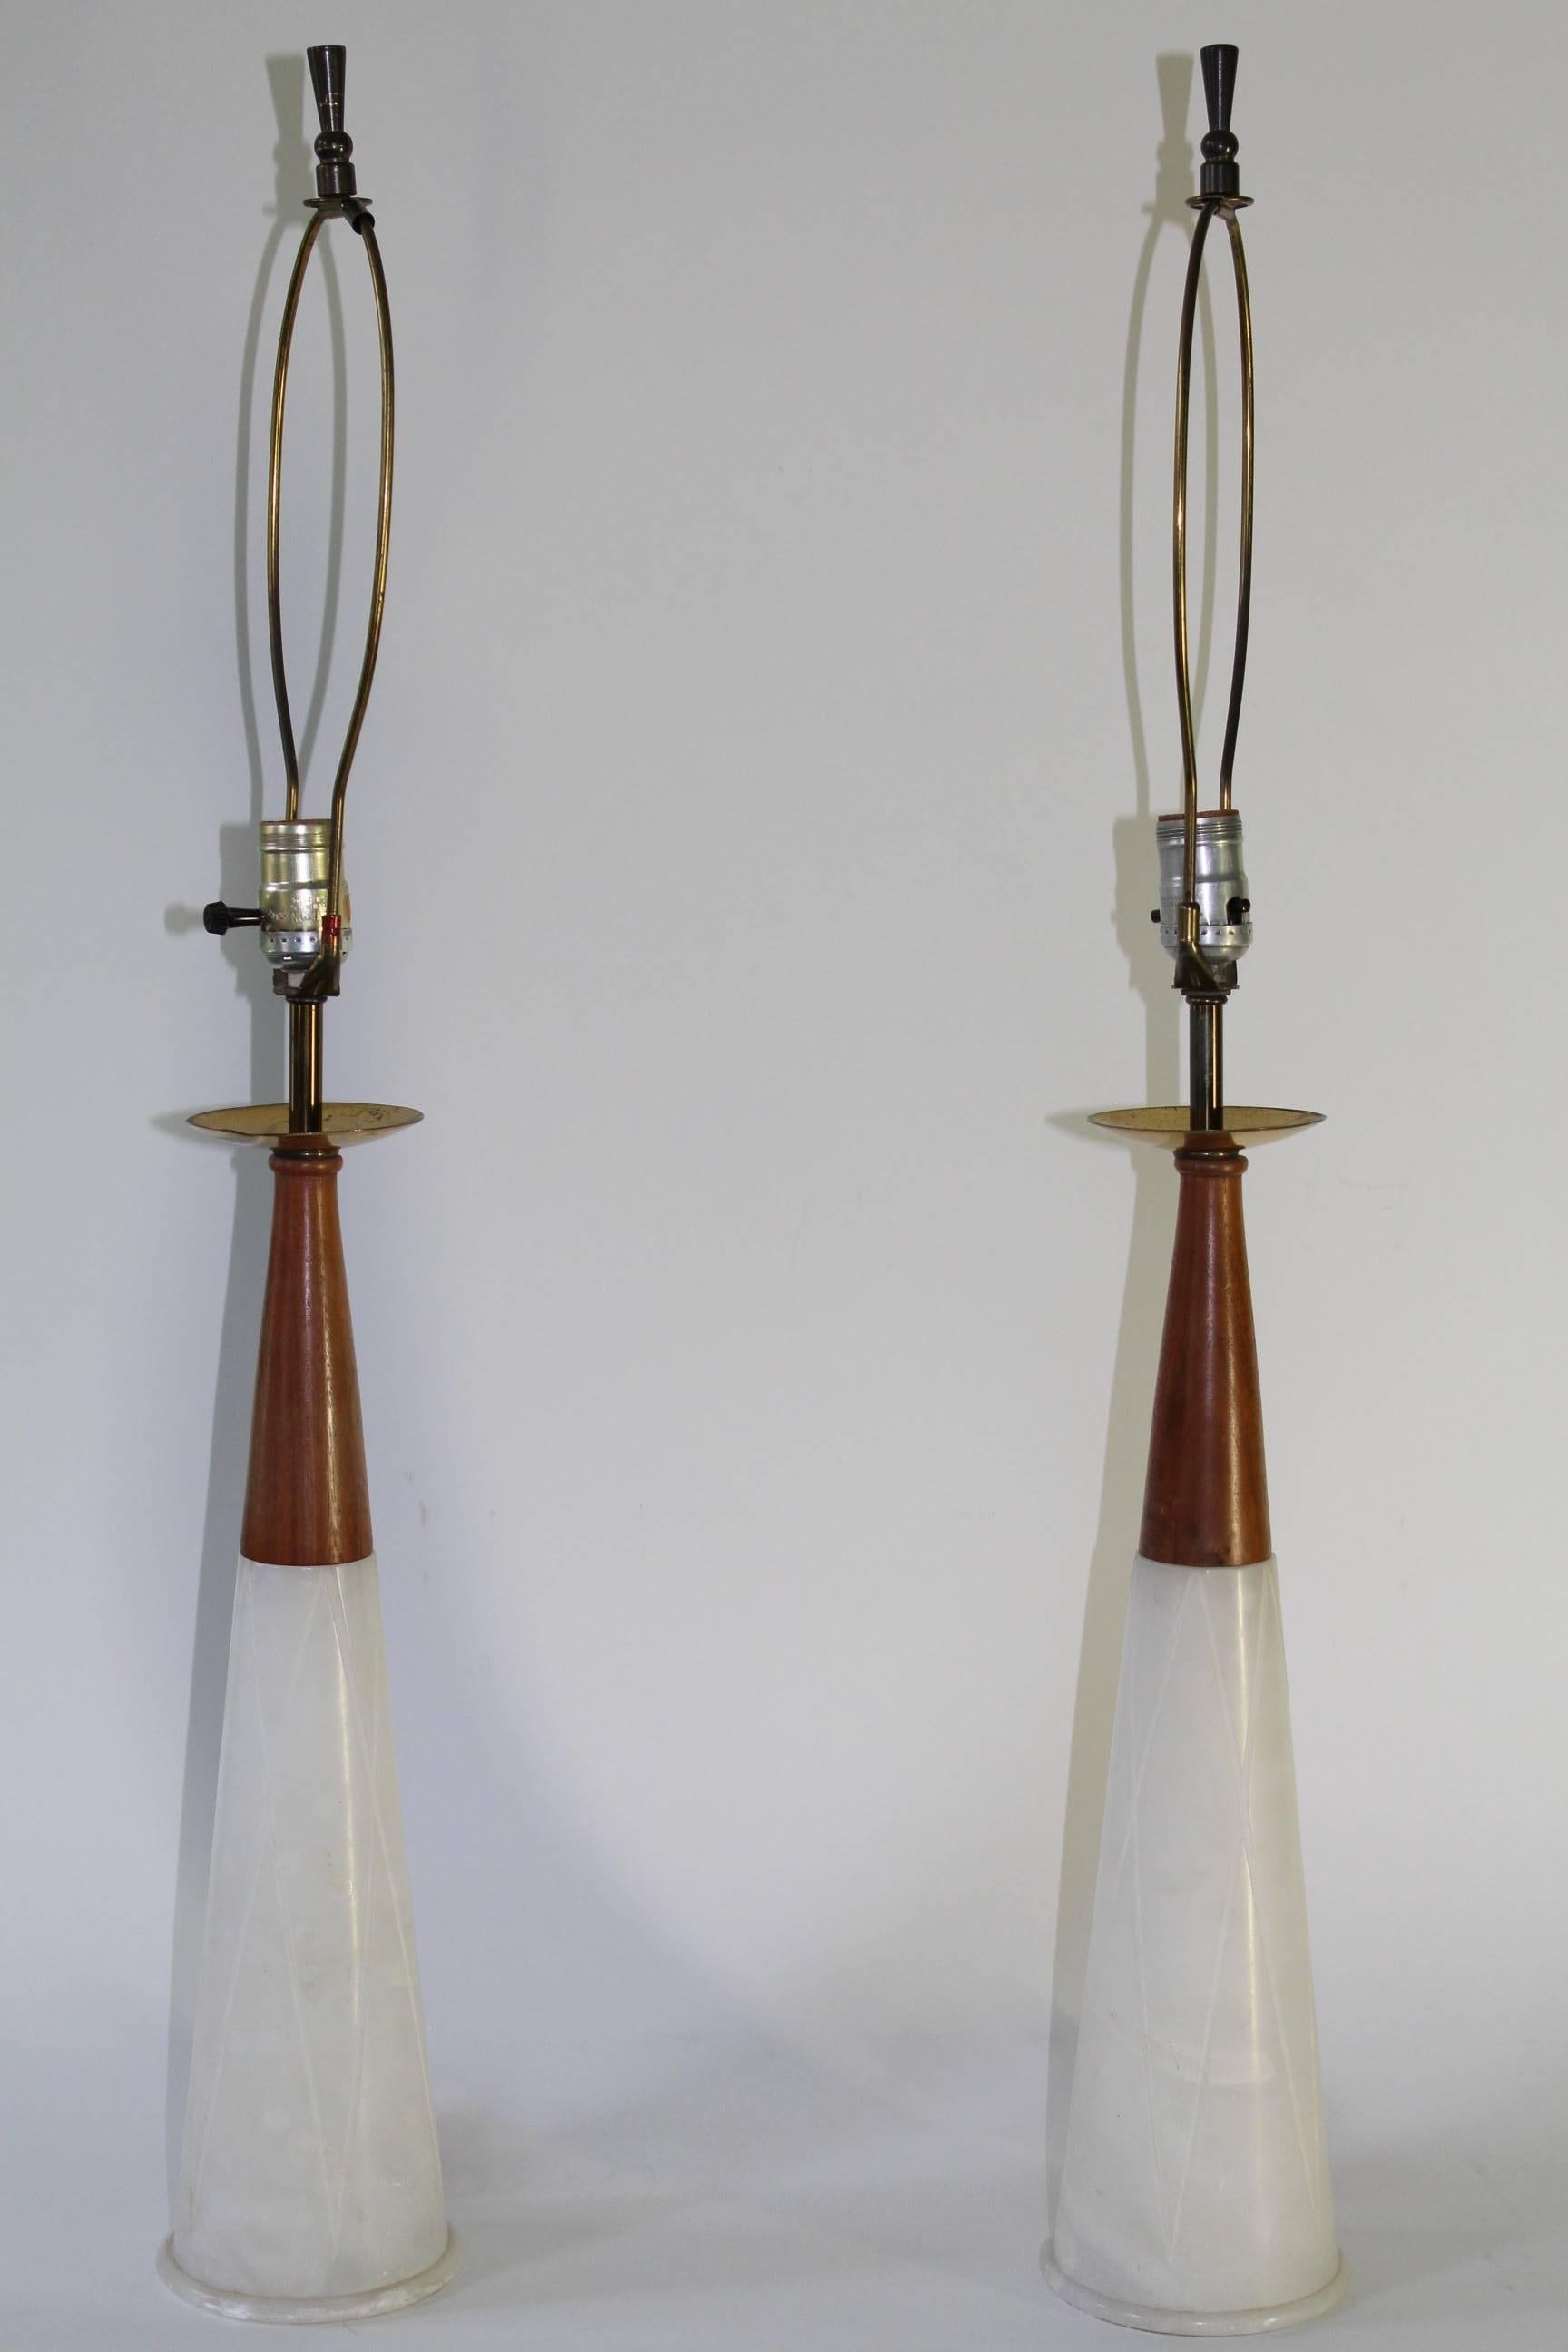 Pair of Mid-Century Modern Italian table lamps, produced circa 1950s, of conical form, crafted of heavy white marble, accented with walnut and brass hardware. Original wiring. Good vintage condition with no signs of wear.

11093